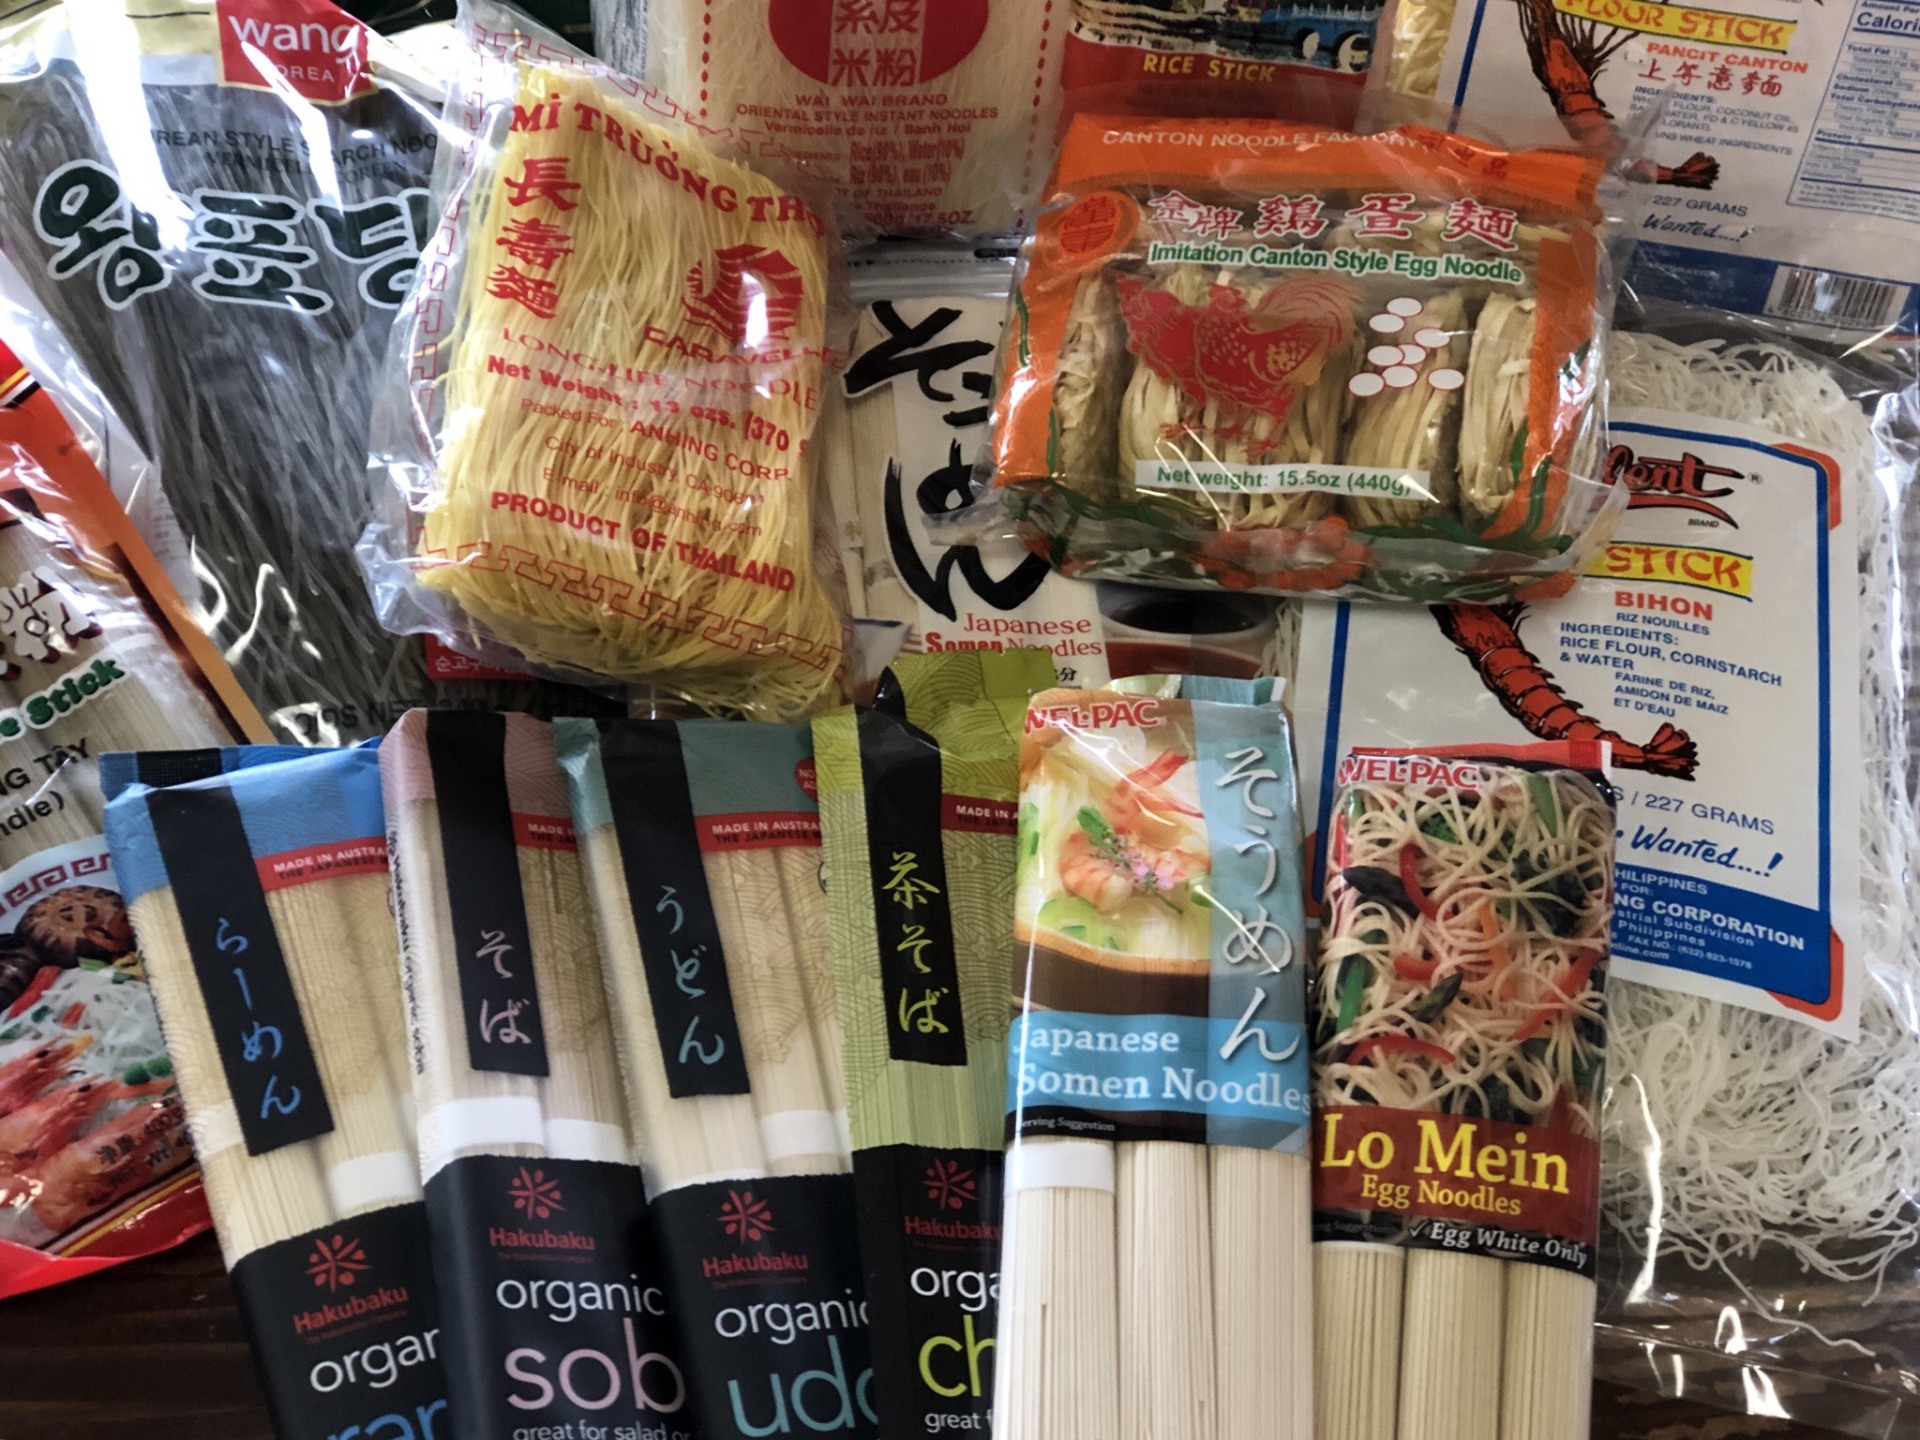 Variety of noodles available at international grocery store in Fort Collins Colorado